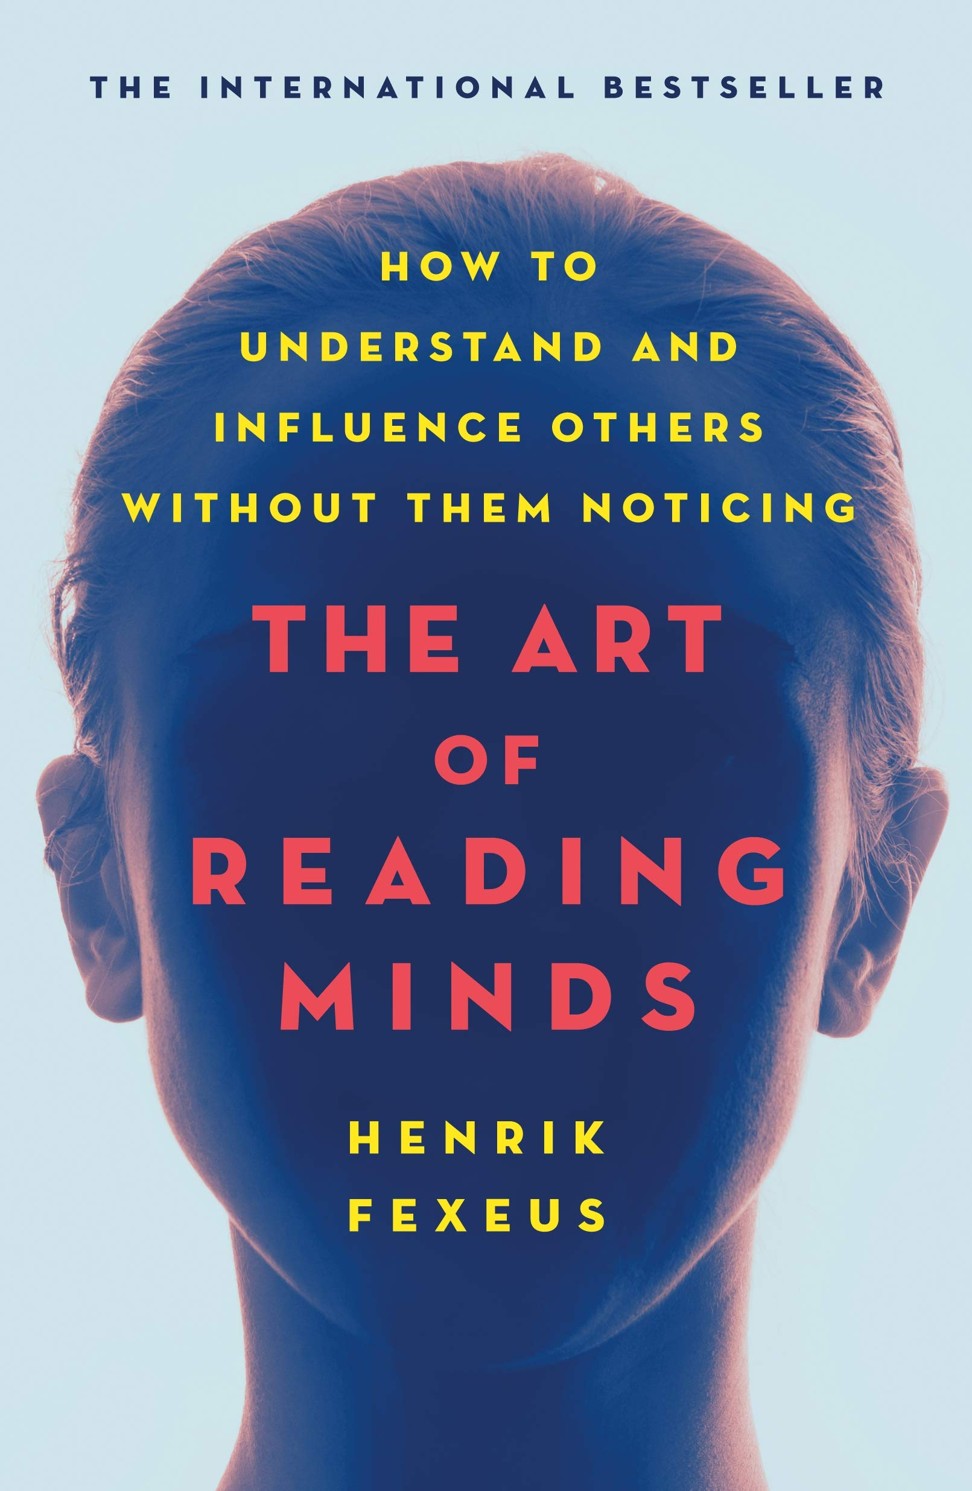 The Art Of Reading Minds by Henrik Fexeus.